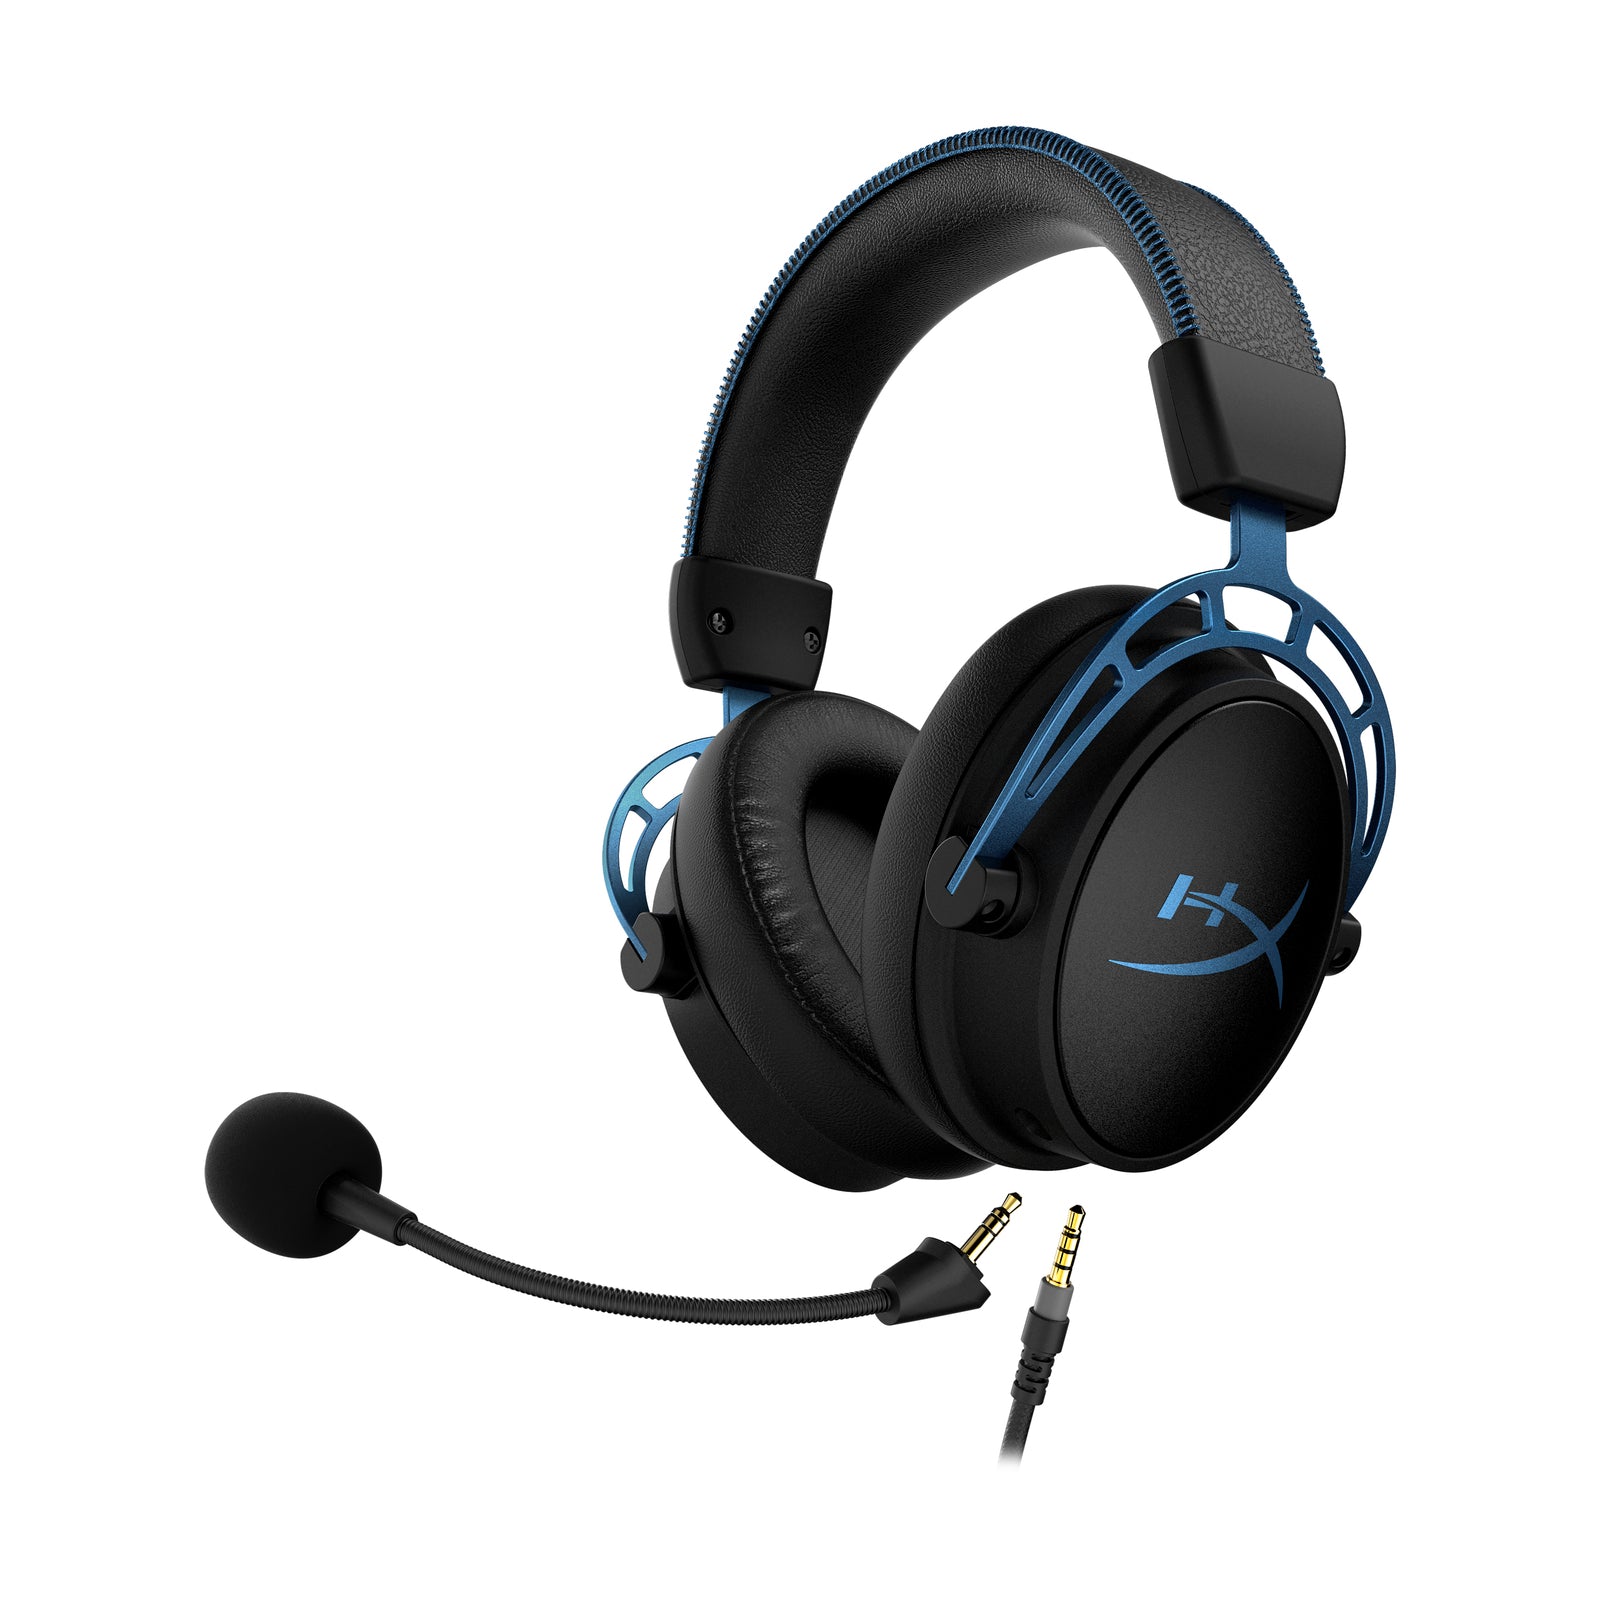 Cloud Alpha S – USB Gaming Headset with 7.1 Surround Sound | HyperX